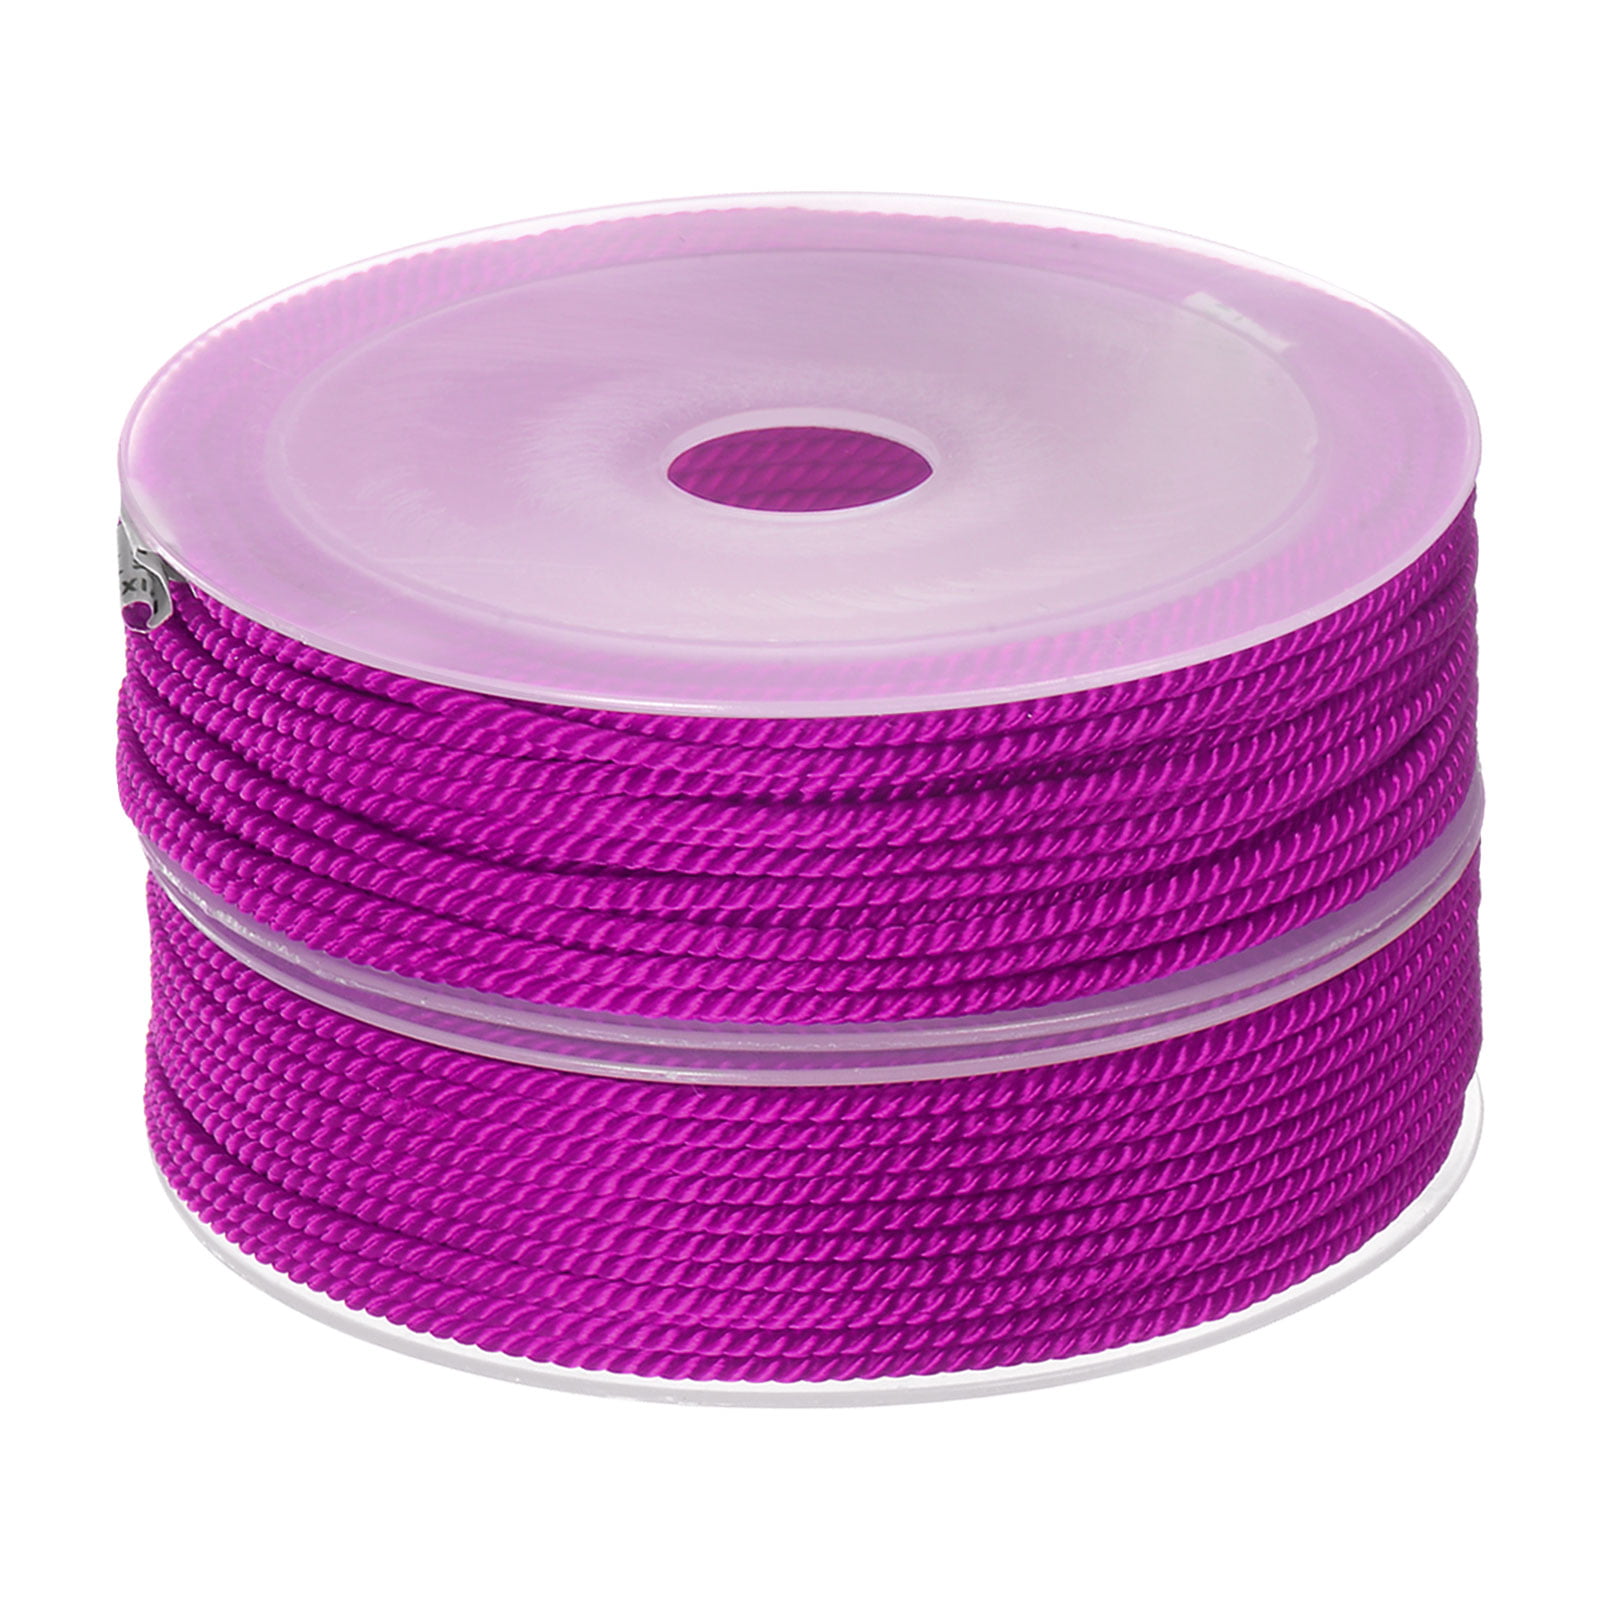 2MM THIN POLYPROPYLENE ROPE BRAIDED POLY CORD STRONG STRING IN